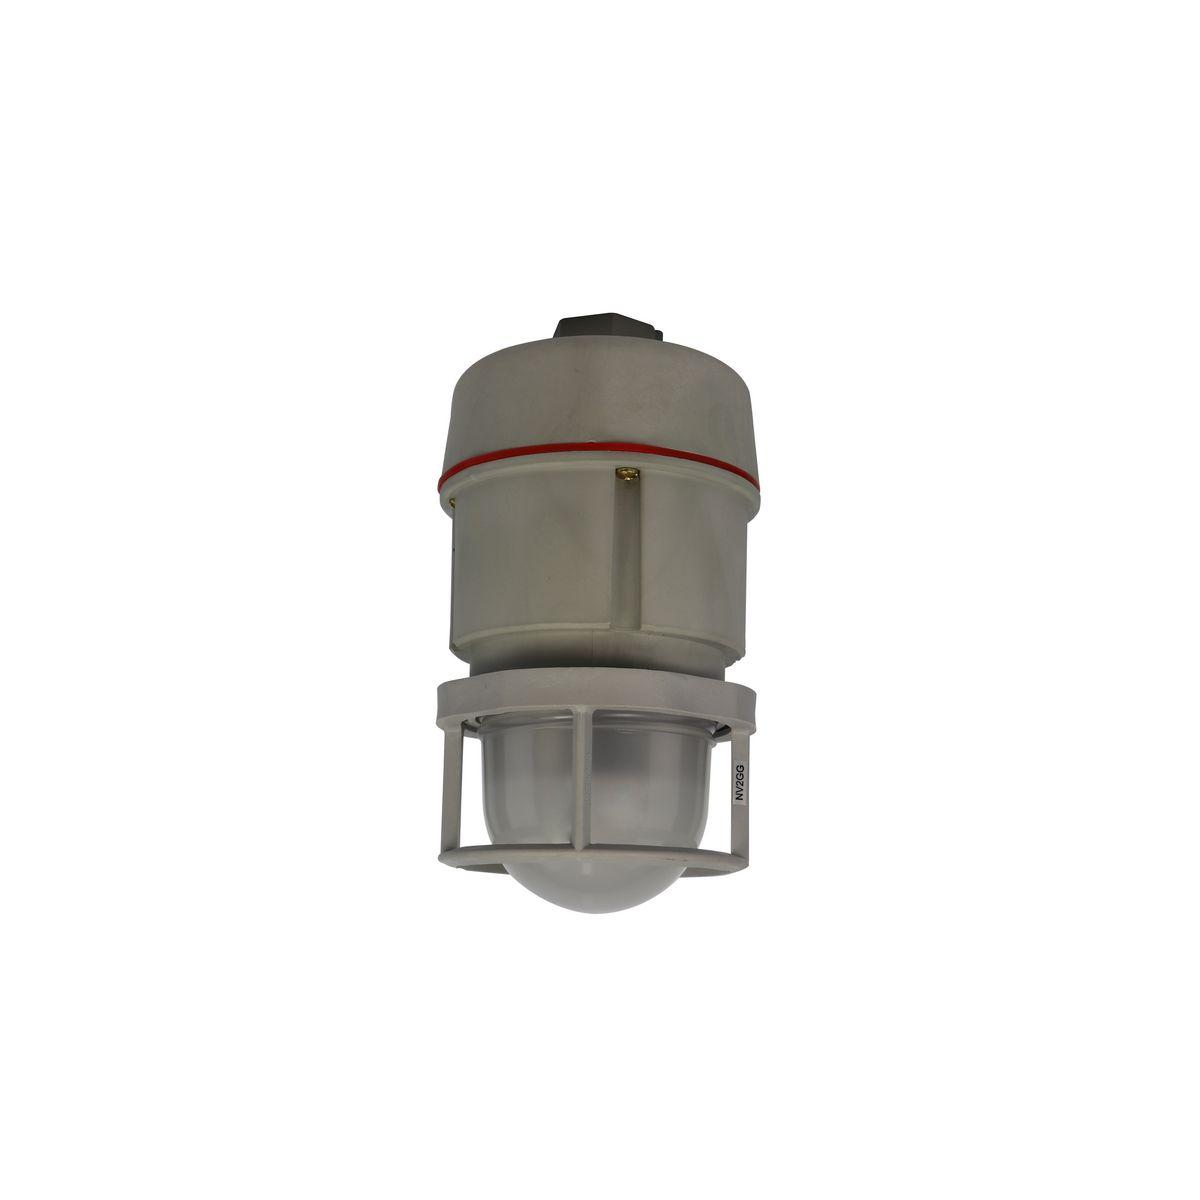 Hubbell NVL230A2G NVL Series Non-Metallic Corrosion Resistant Hazardous Location LED Fixture, 3/4" Pendant Mount With Guard  ; Energy and labor-saving LED ; High Efﬁcacy (lumens per watt) ; Compact Size ; Type 3, 4, & 4X Rated ; IP66 Marine Rated ; ABS Approved ; Resists c